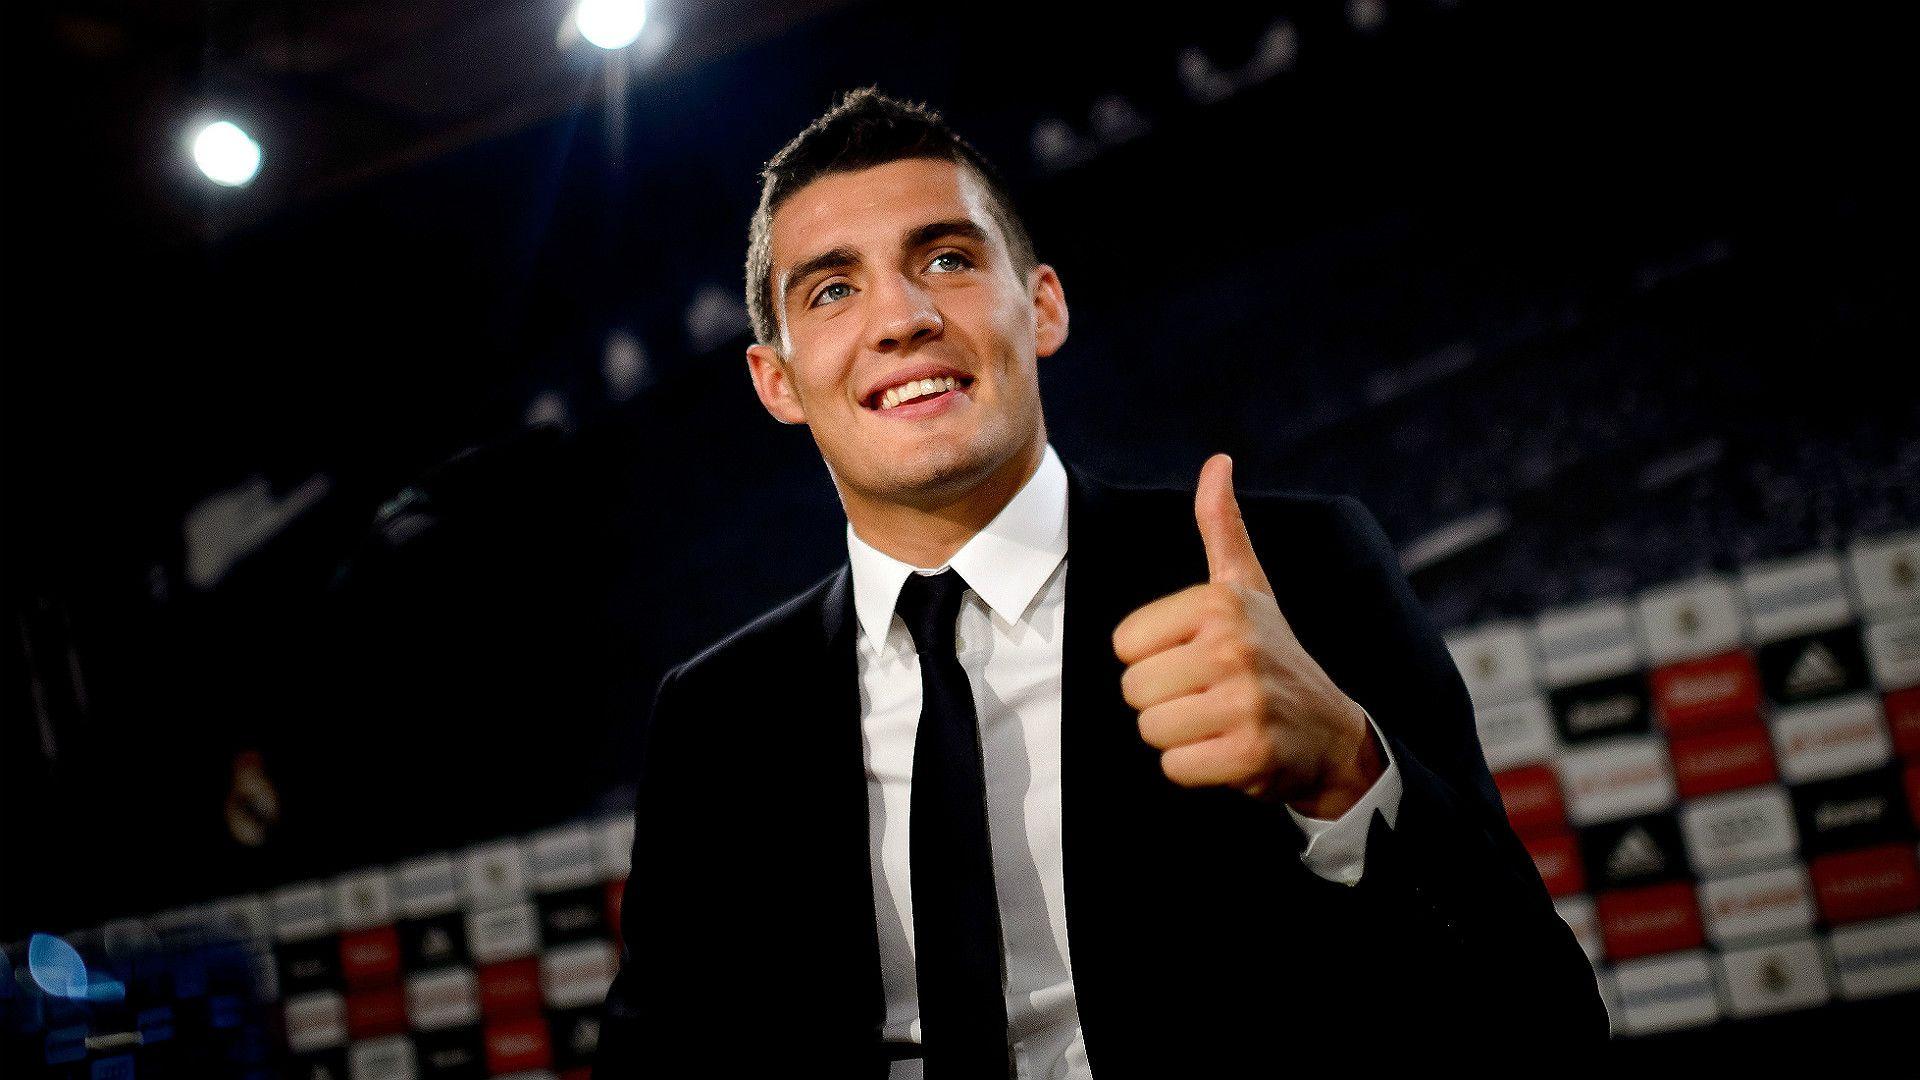 Euro 2016 comment: Kovacic looking to get career back on track